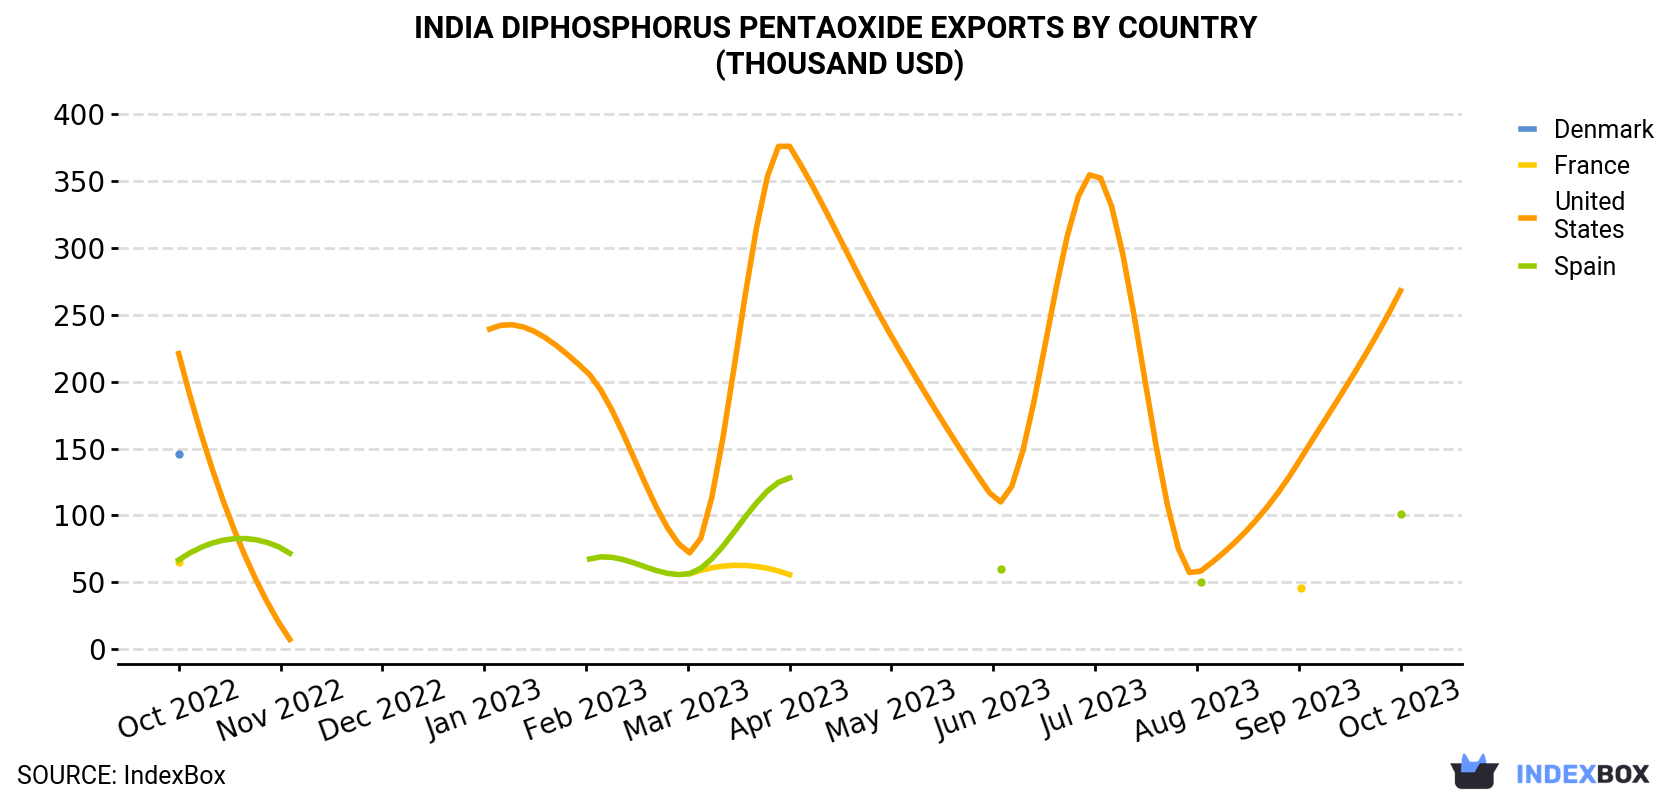 India Diphosphorus Pentaoxide Exports By Country (Thousand USD)